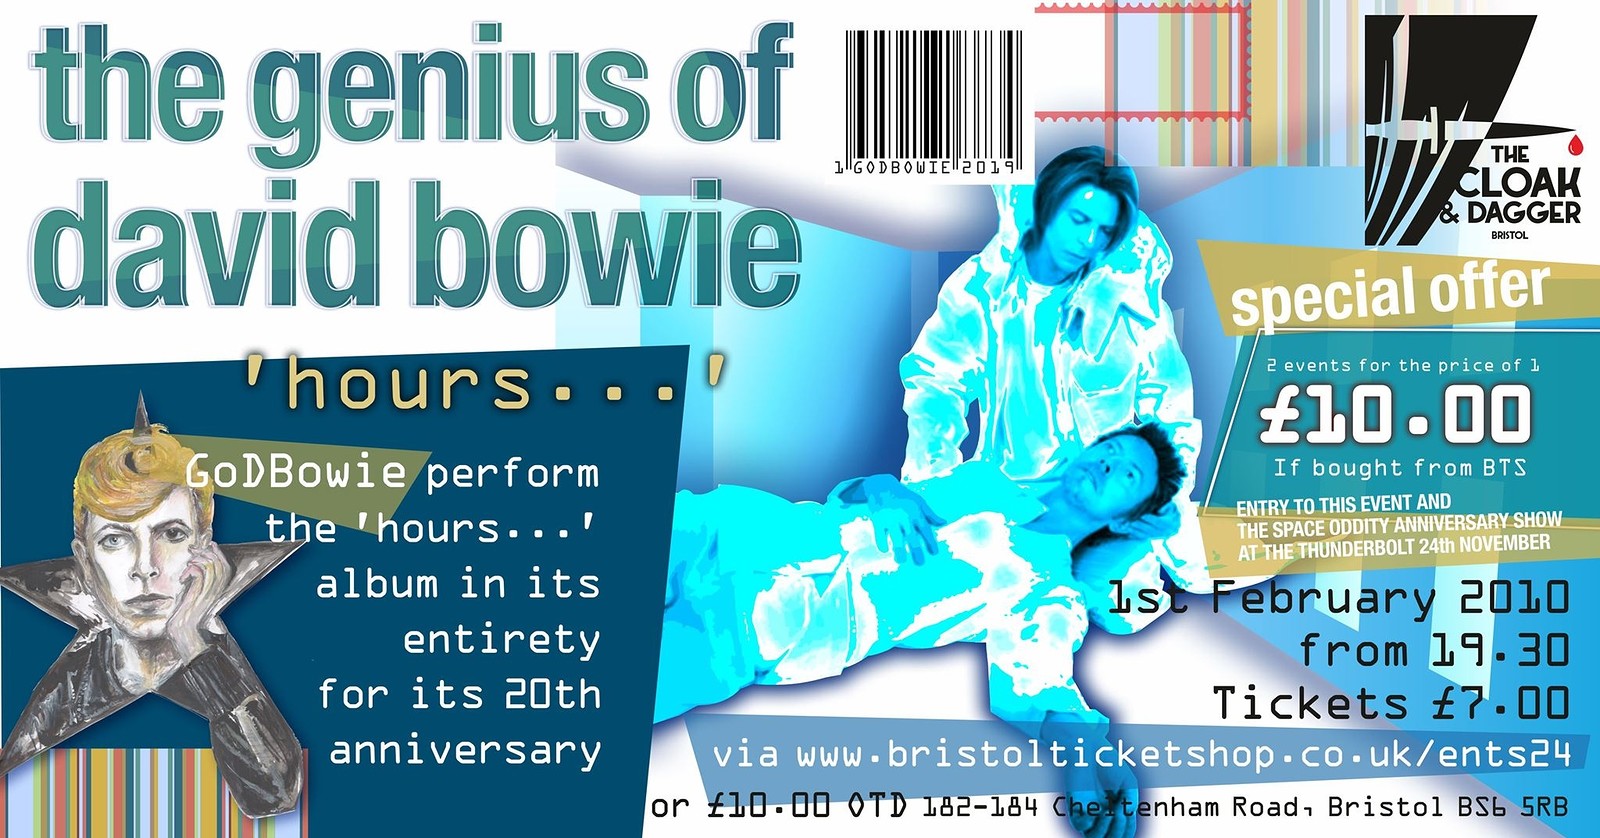 GoDBowie plays hours 20th Anniversary at The Cloak and Dagger